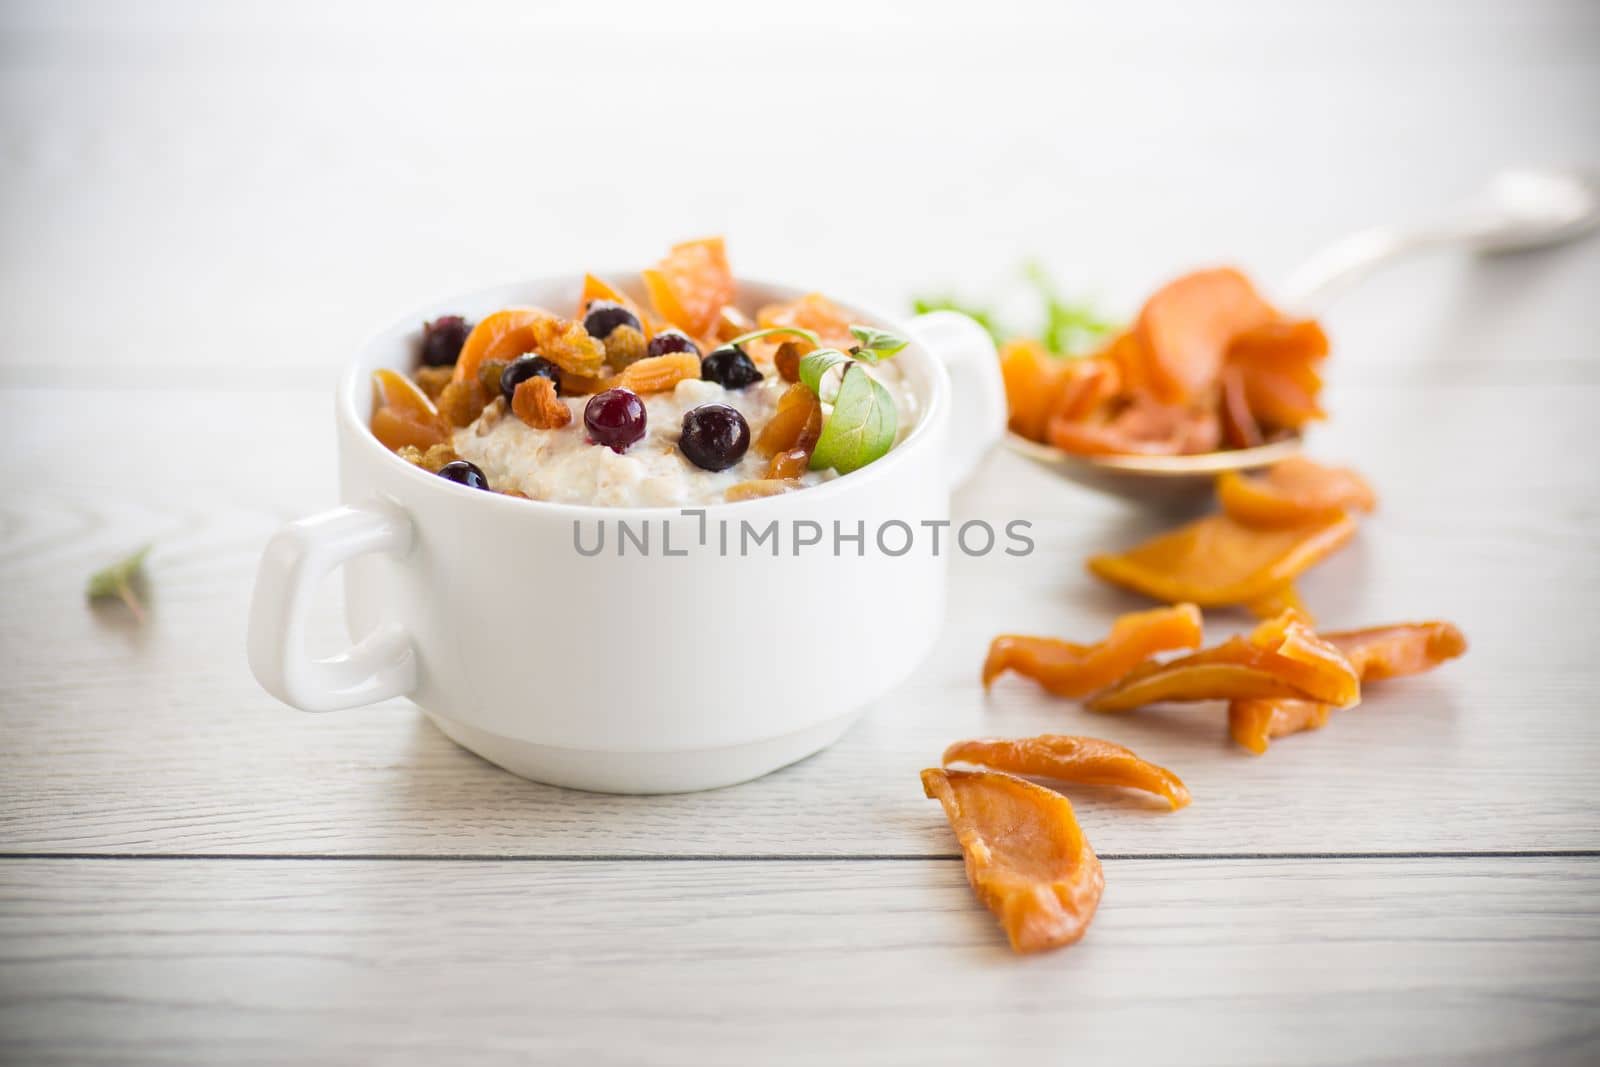 oatmeal with candied fruits, raisins in a plate by Rawlik